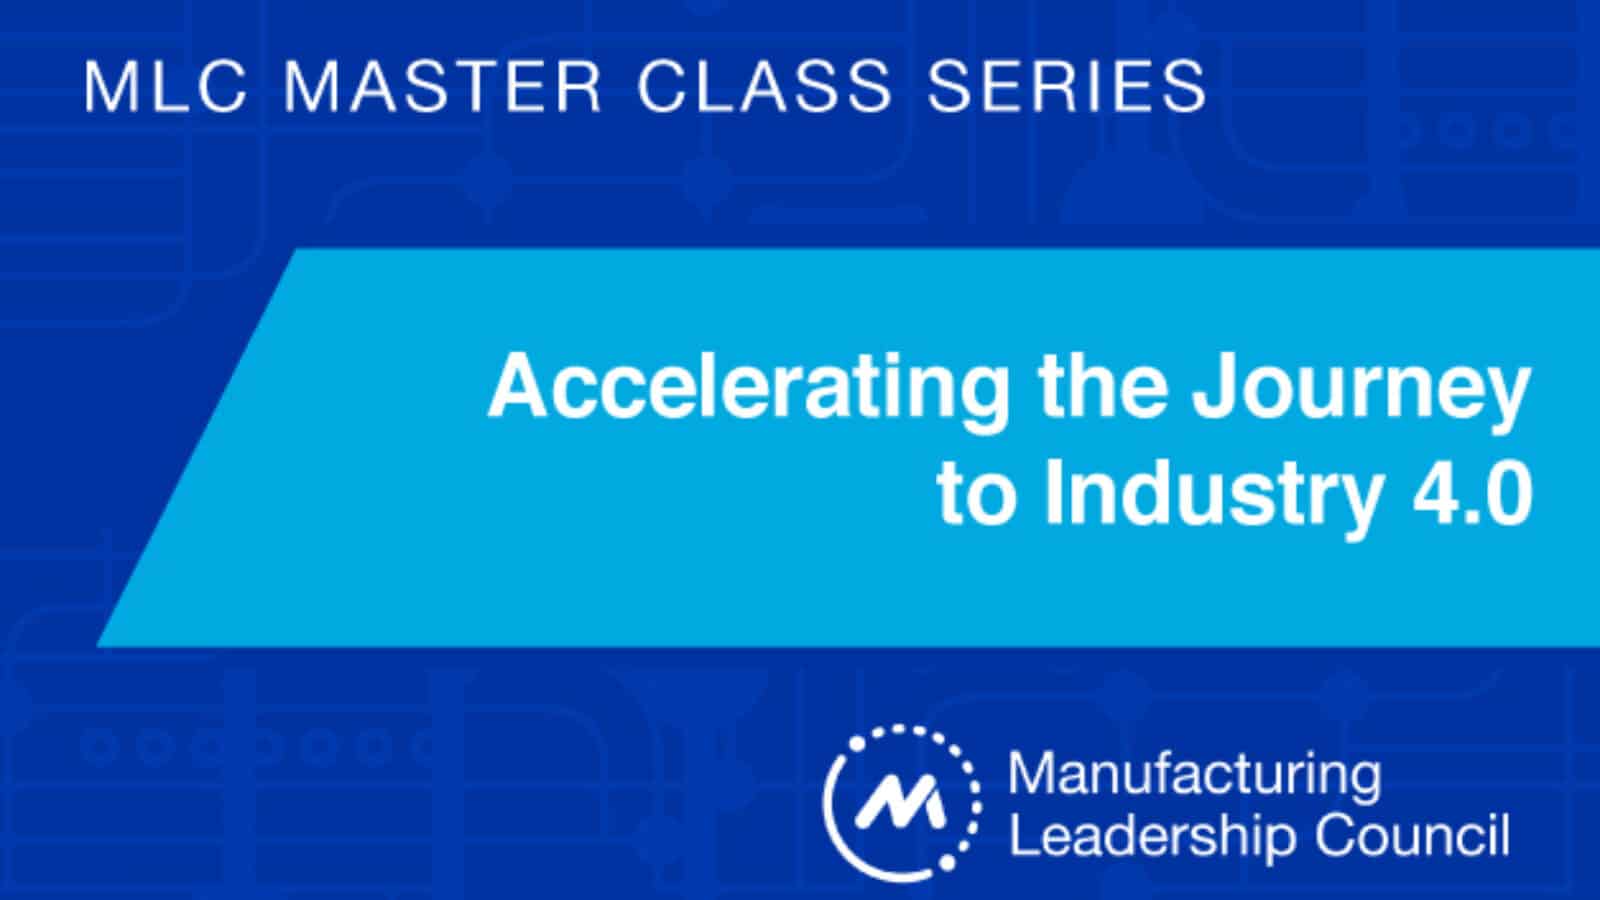 Accelerating the Journey to Industry 4.0